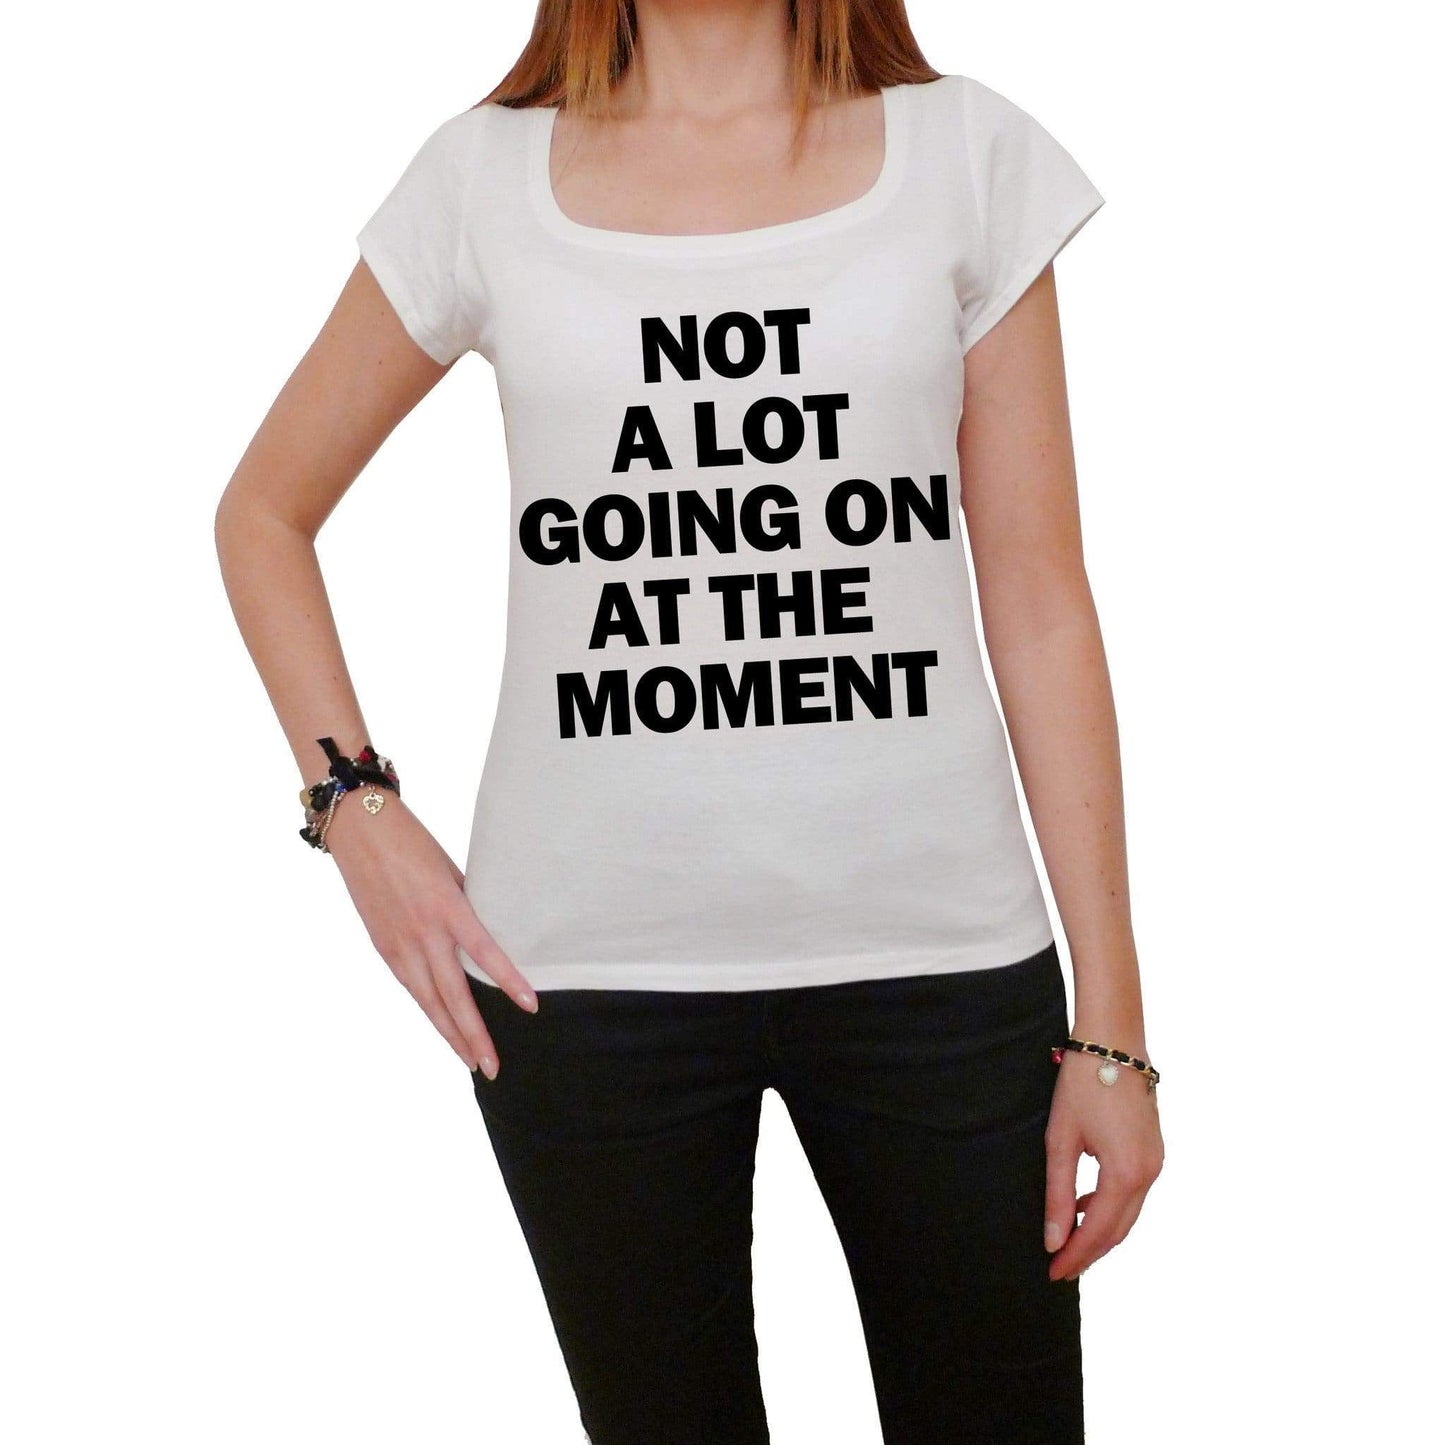 Not A Lot Going On At The Moment: Womens T-Shirt Picture Celebrity 00038